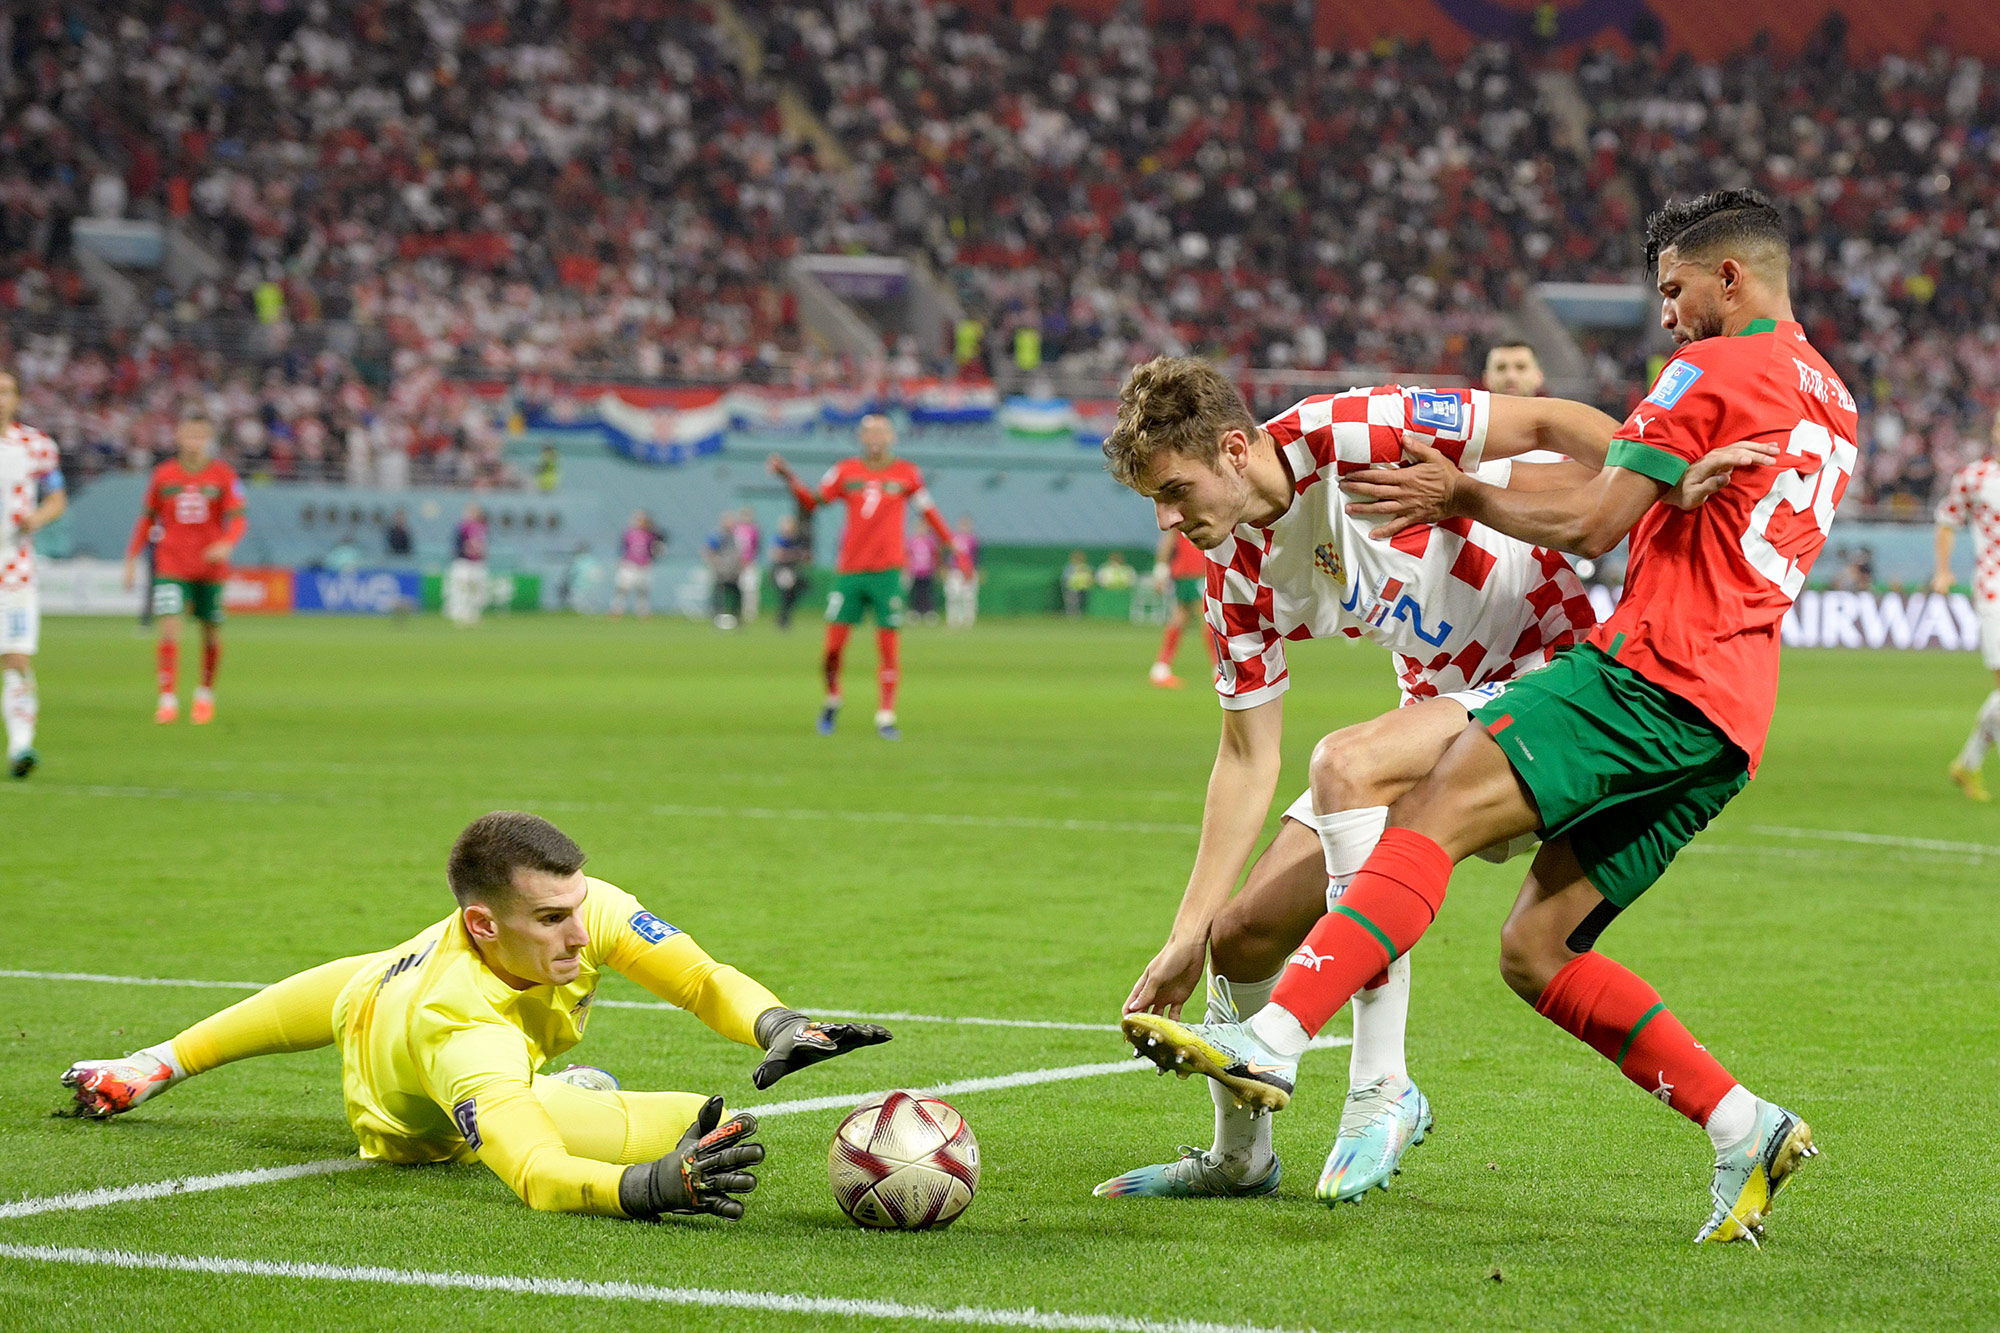 Croatia’s goalkeeper Dominik Livakovic dives for the ball during the match against Morocco on Saturday. 